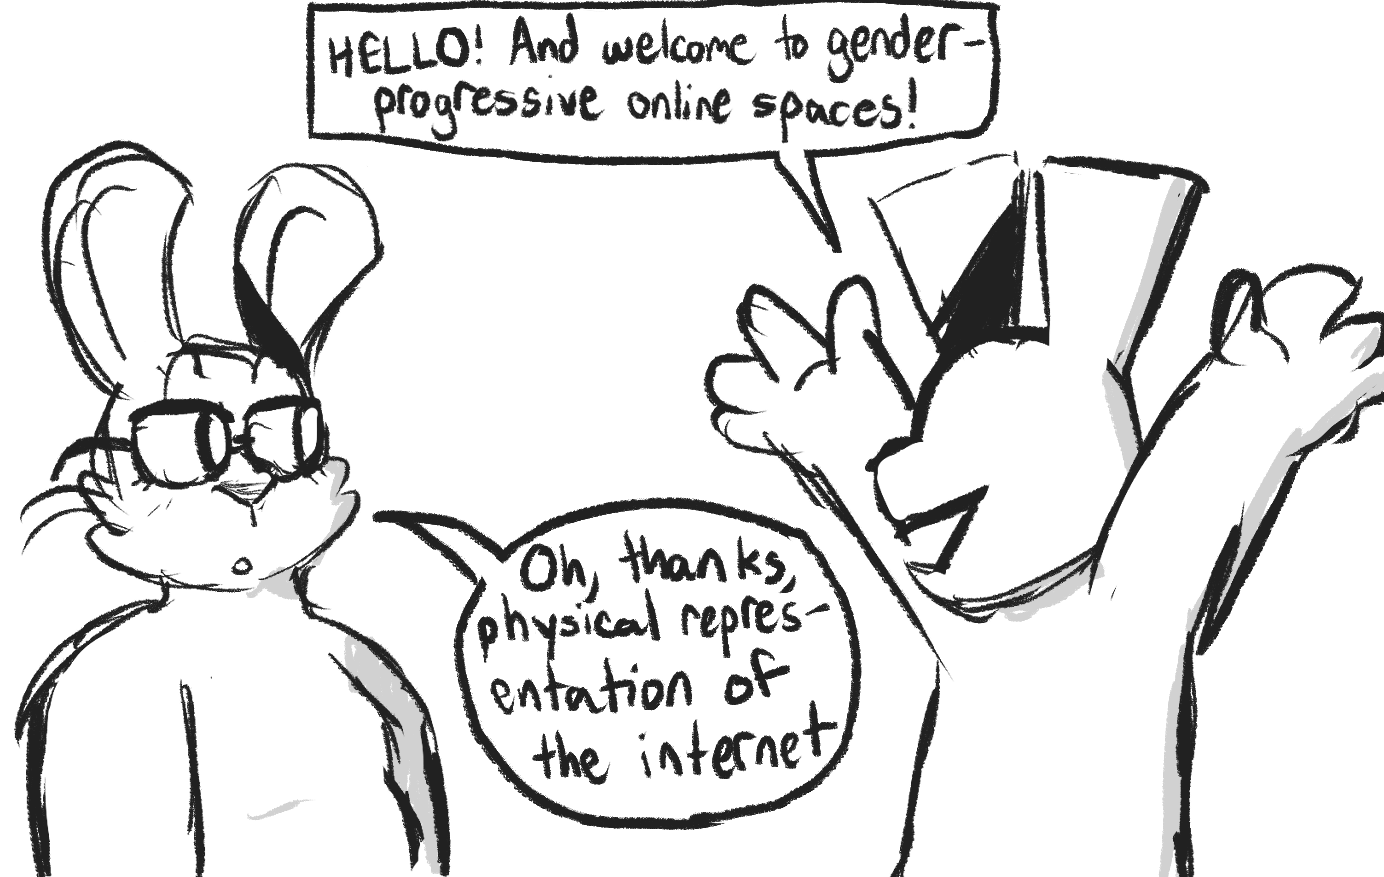 A sketchy comic. A rabbit drawn with very sharp corners and no eyes, throws its hands up in the air says, 'HELLO! And welcome to gender-progressive online spaces!' A fatter rabbit, with glasses and drawn in the artist's normal style, replies calmly, 'Oh, thanks, physical manifestation of the internet.'